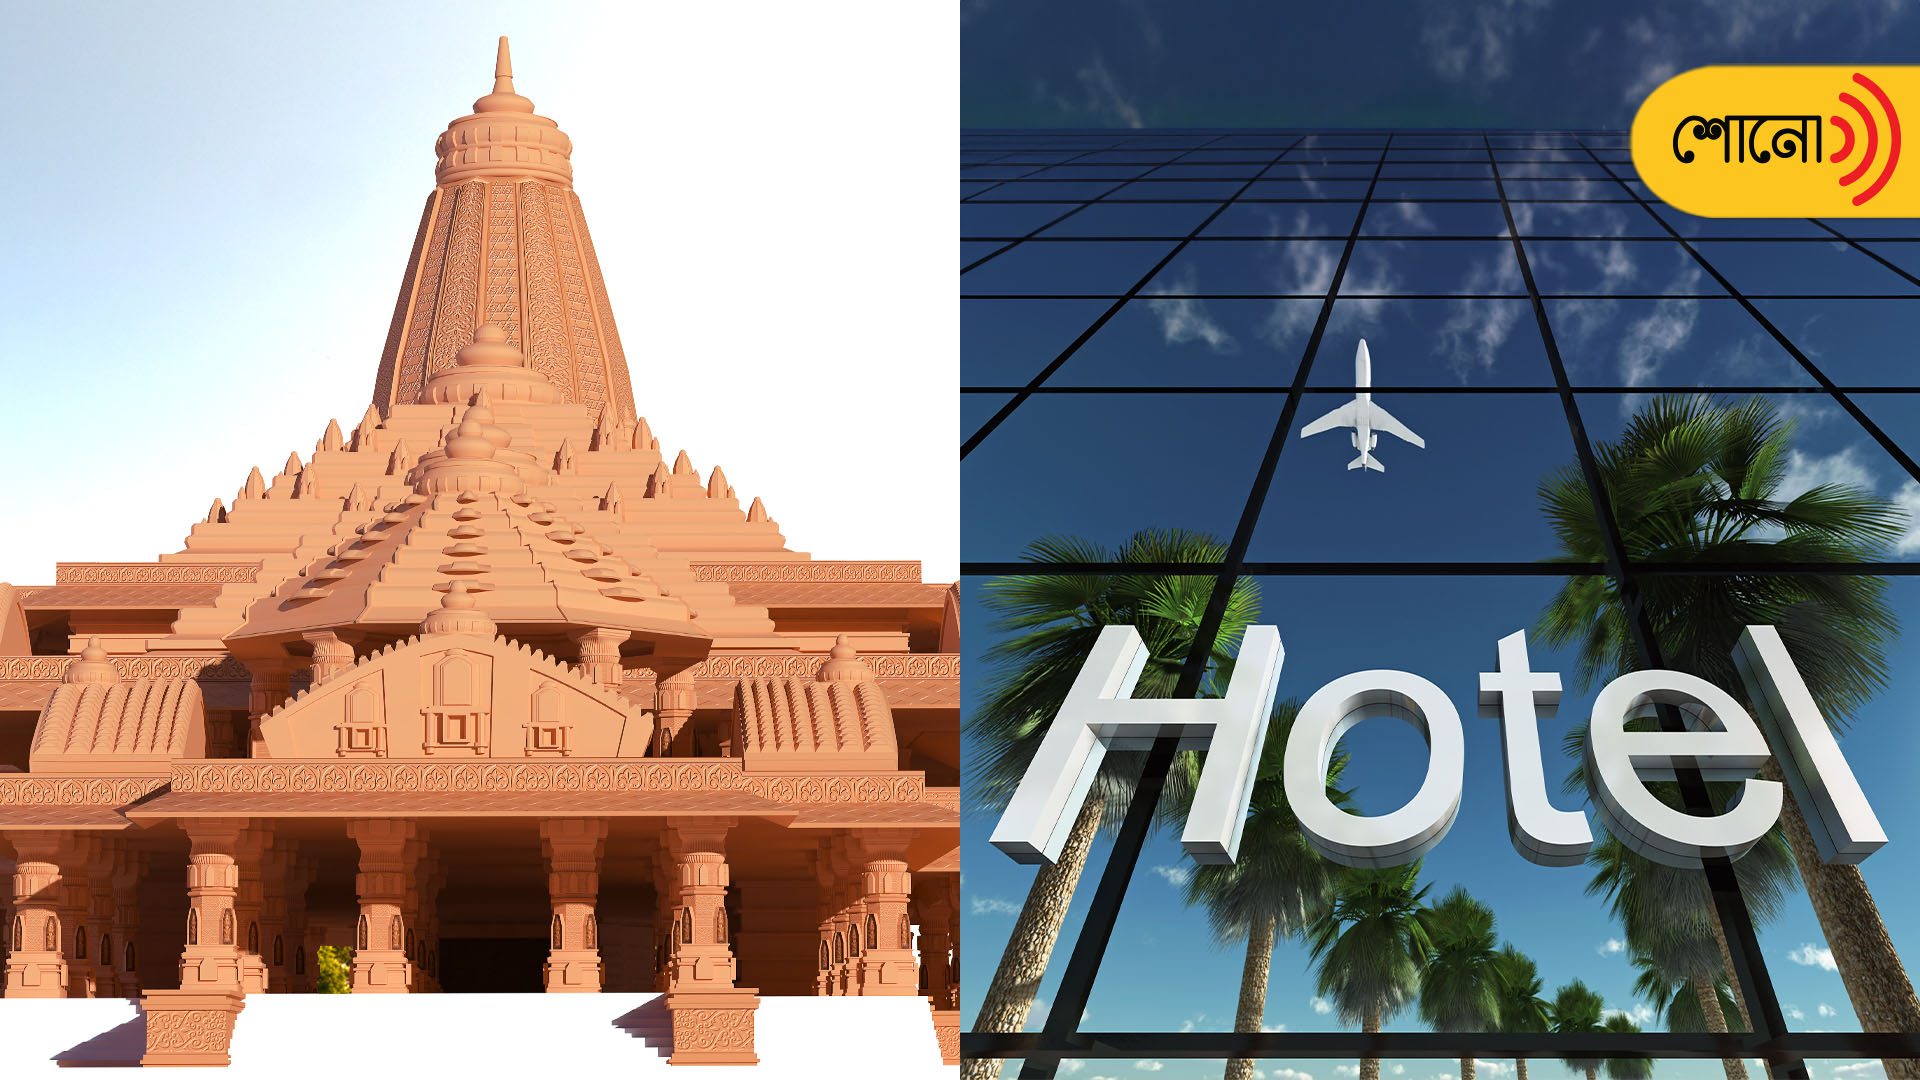 Major hotels in Ayodhya gear up to benefit from Ram Mandir inauguration